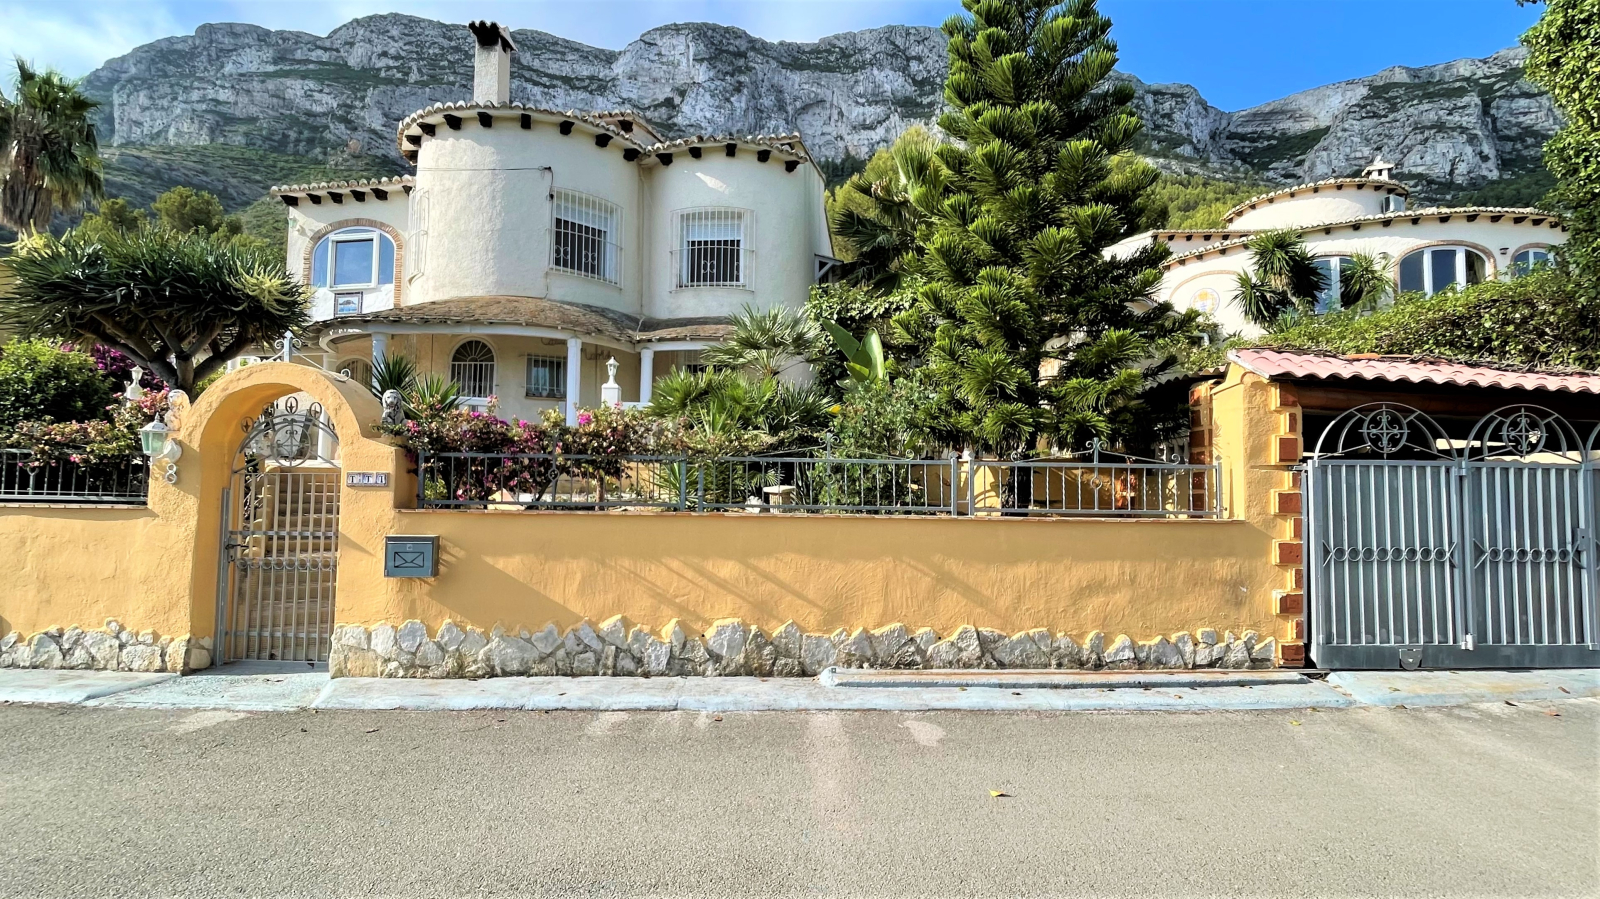 Paradise close to nature in Denia at the foot of the Montgó: guest flat, pool, sea view and garage